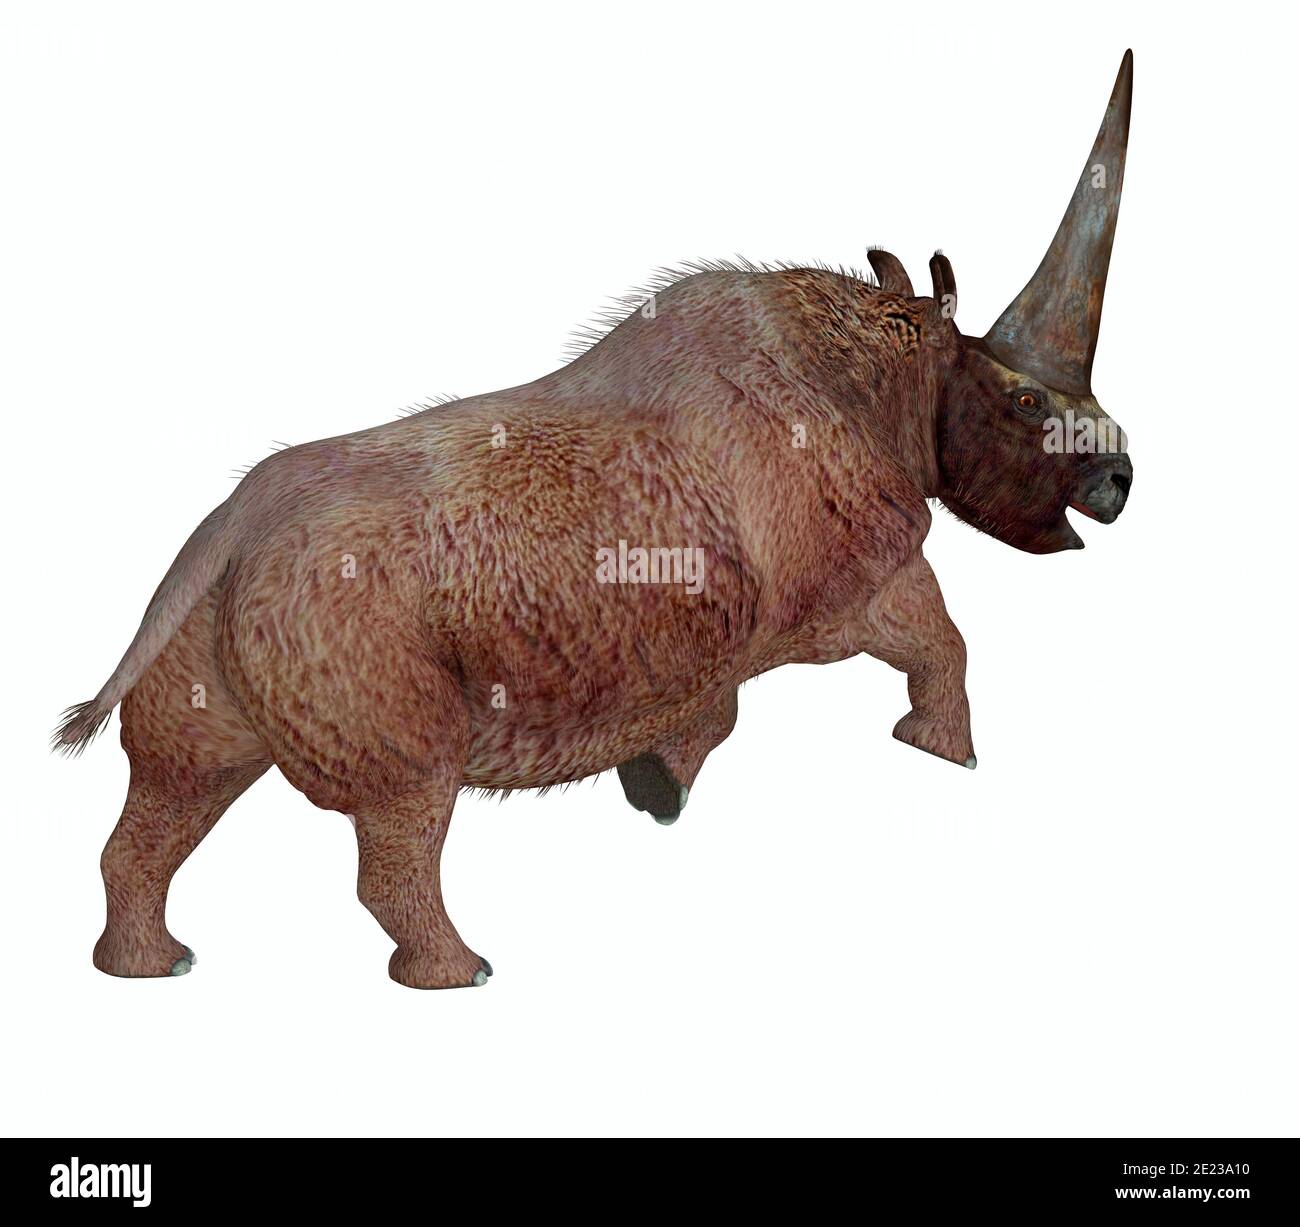 Elasmotherium was a herbivorous rhinoceros mammal that had a large horn on it's forehead and lived during the Pliocene and Pleistocene periods. Stock Photo